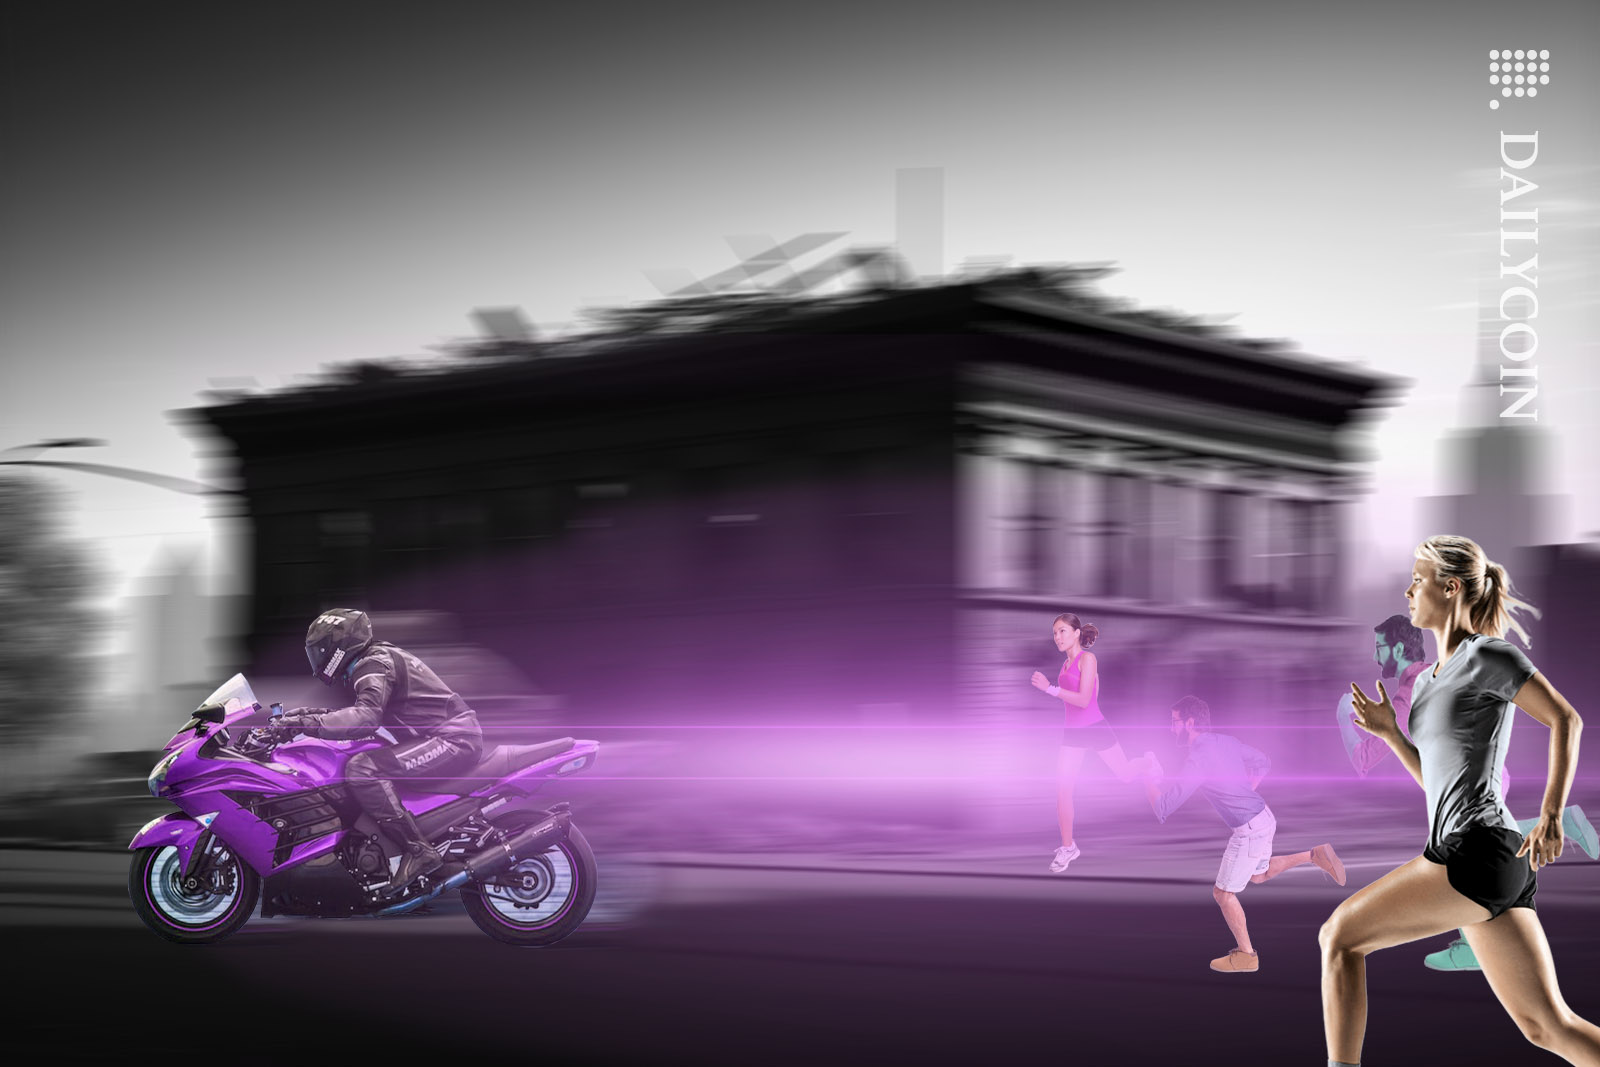 A biker speeds on a street in a ruined, destroyed landscape, leaving runners behind.